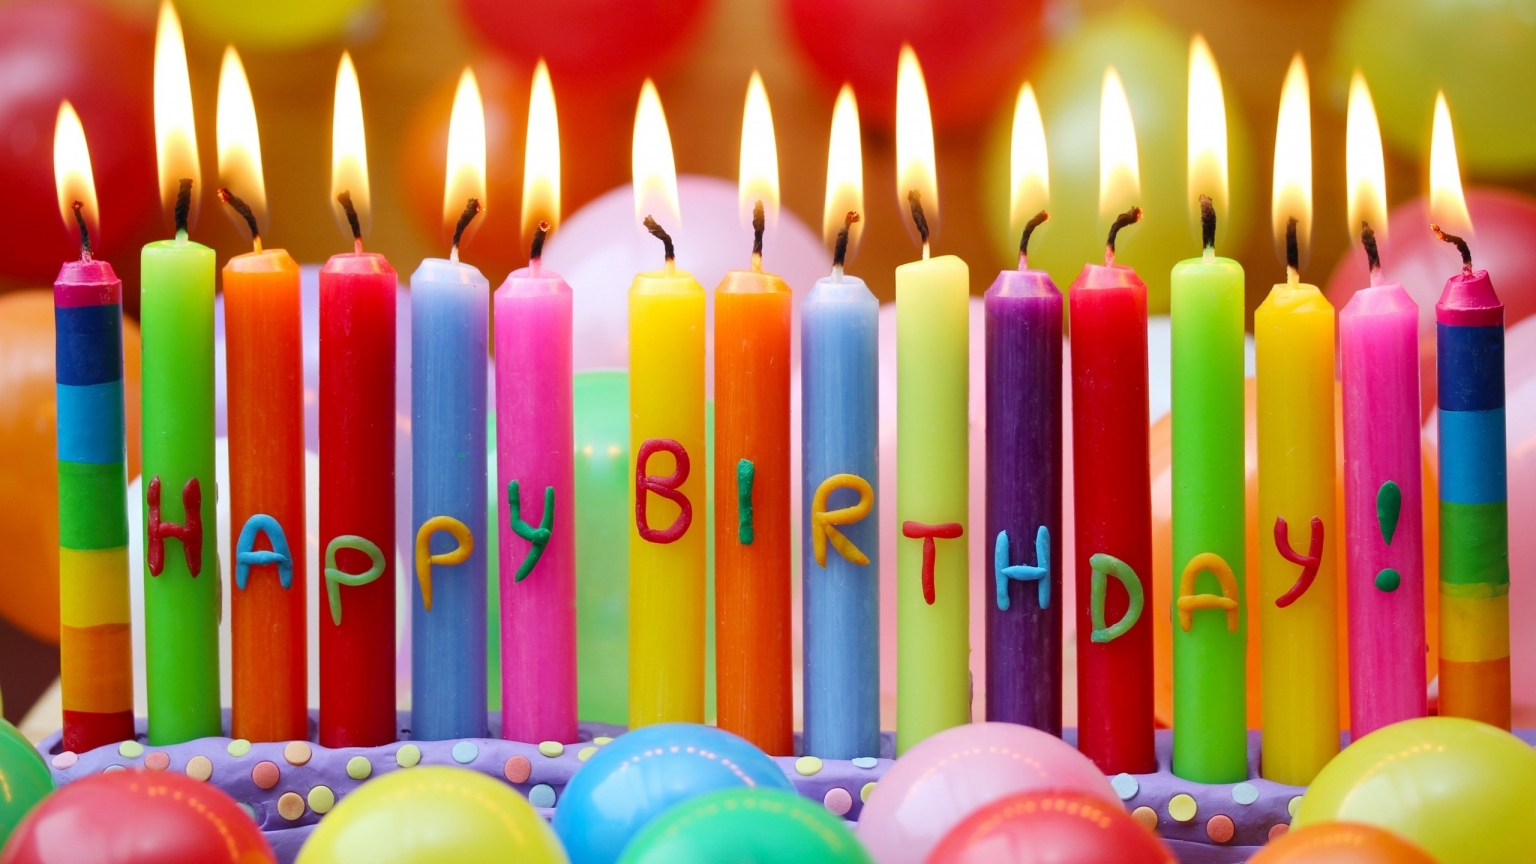 Happy Birthday Candles for 1536 x 864 HDTV resolution